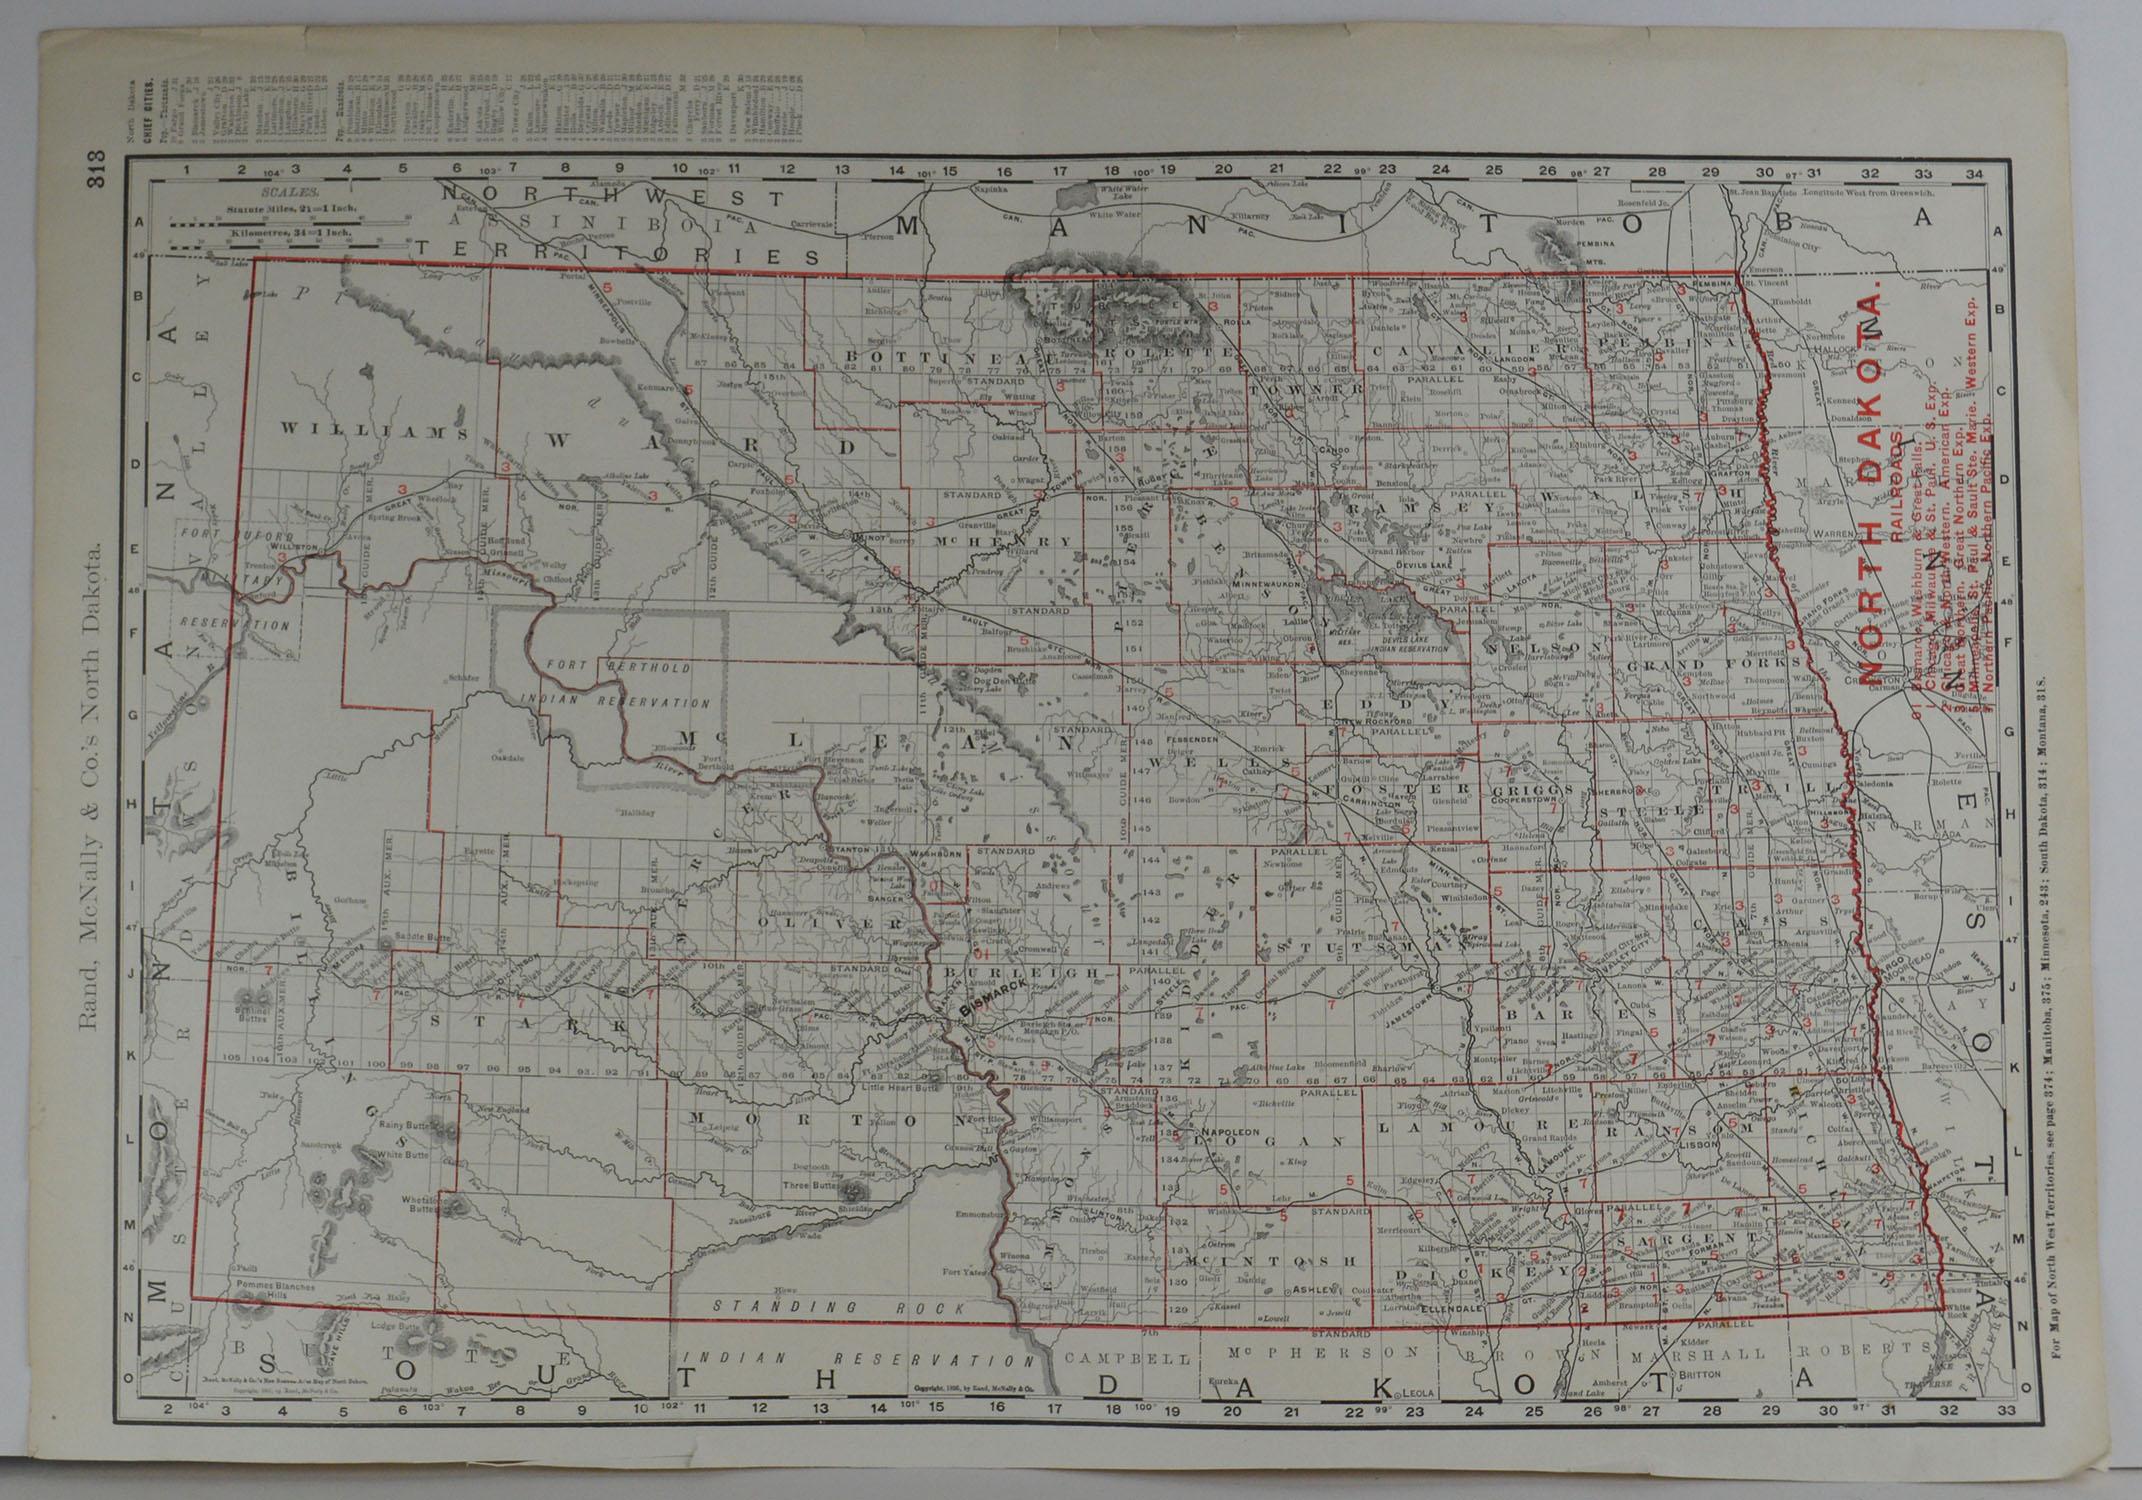 Fabulous monochrome map with red outline color

Original color

By Rand, McNally & Co.

Published, circa 1900

Unframed

Minor edge tears.

  